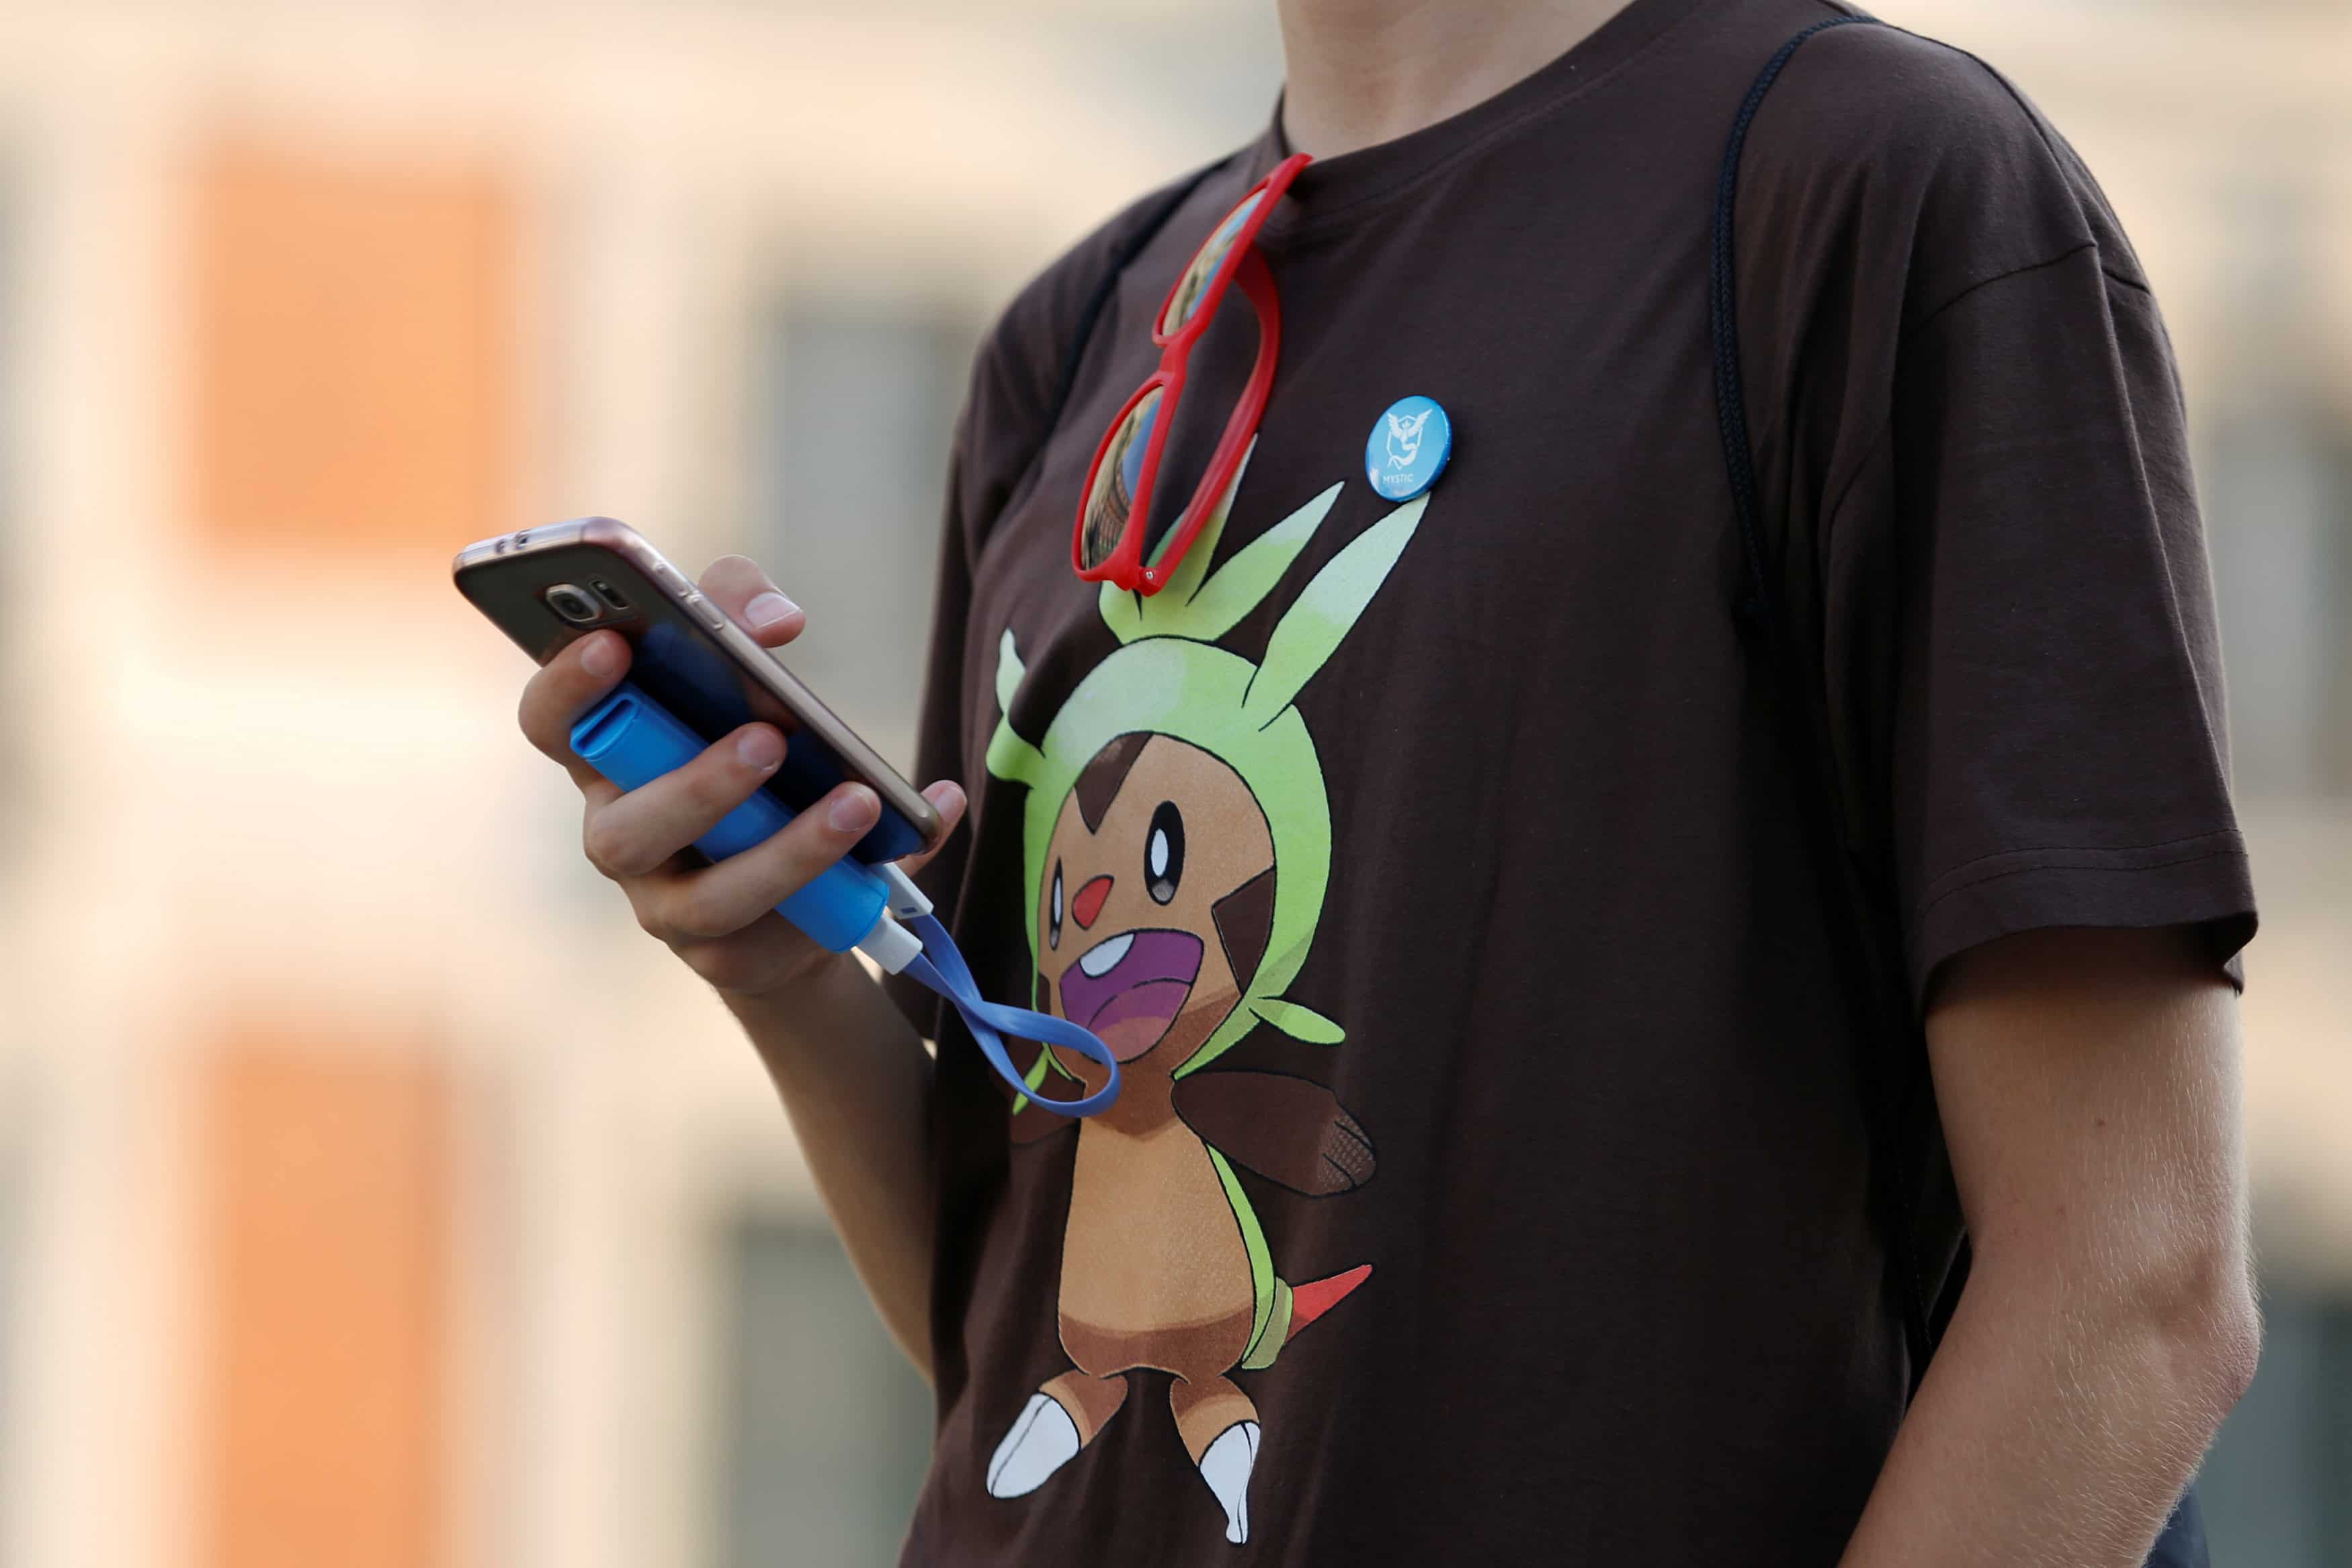 Reliance Jio partners with Niantic to bring Pokemon GO to India